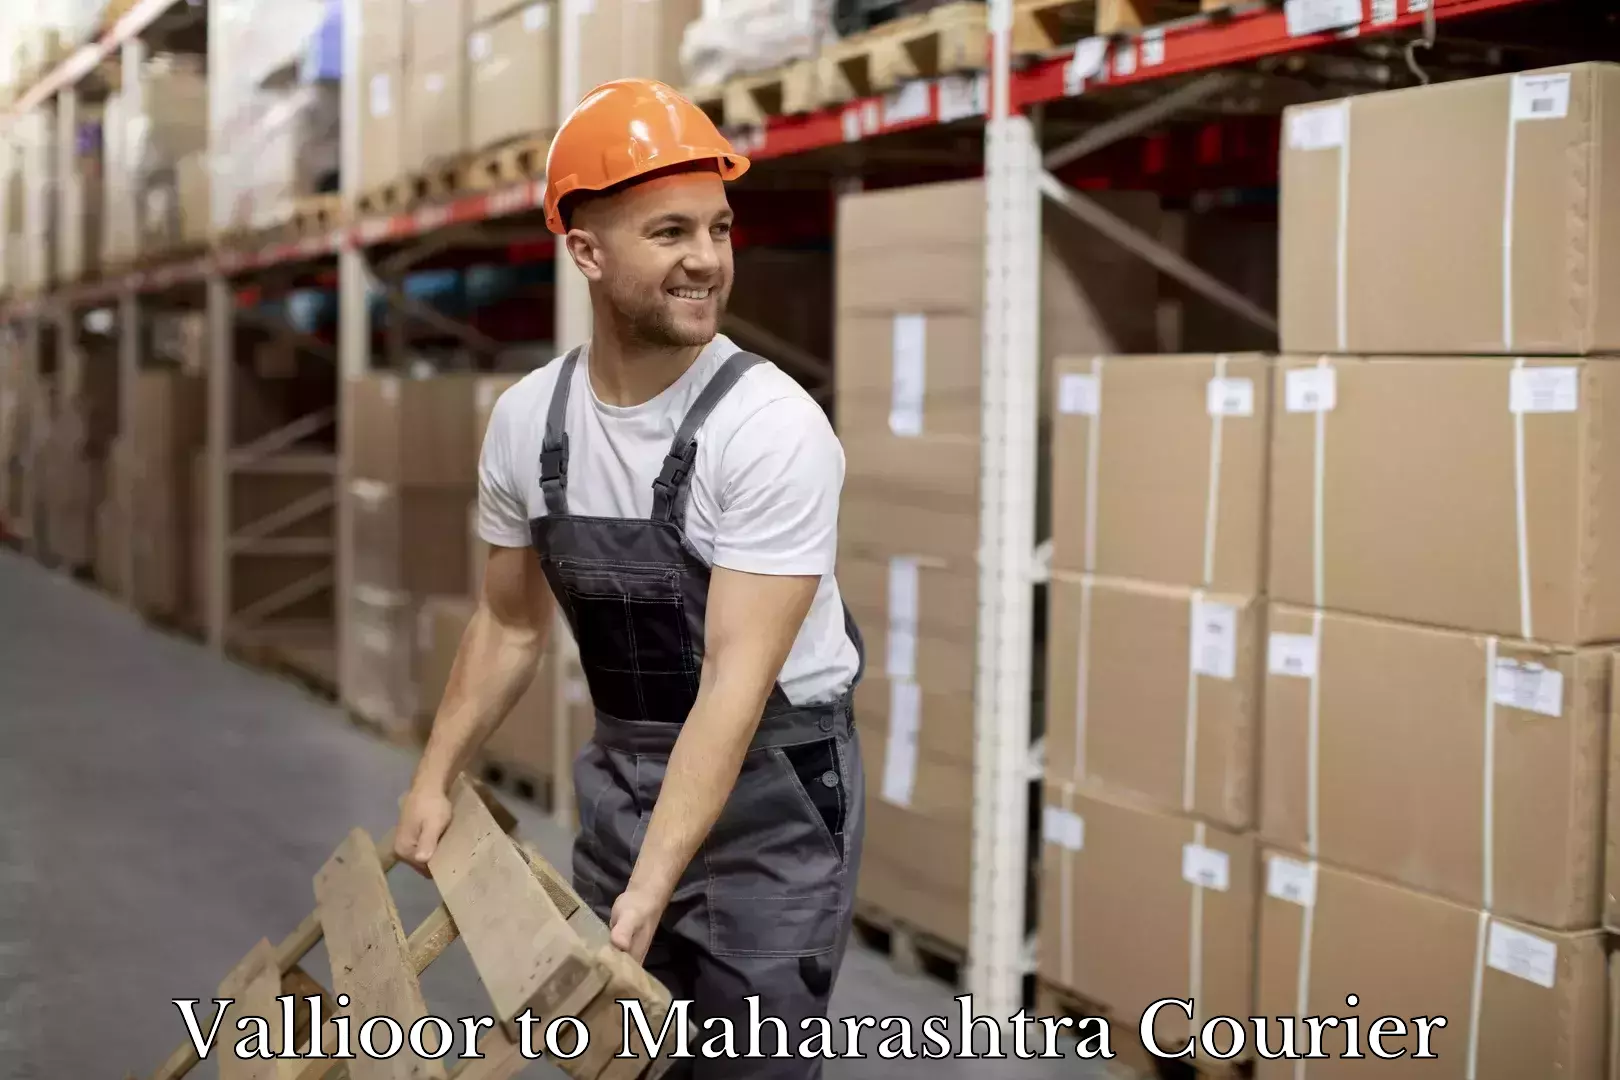 High-quality delivery services in Vallioor to Maharashtra